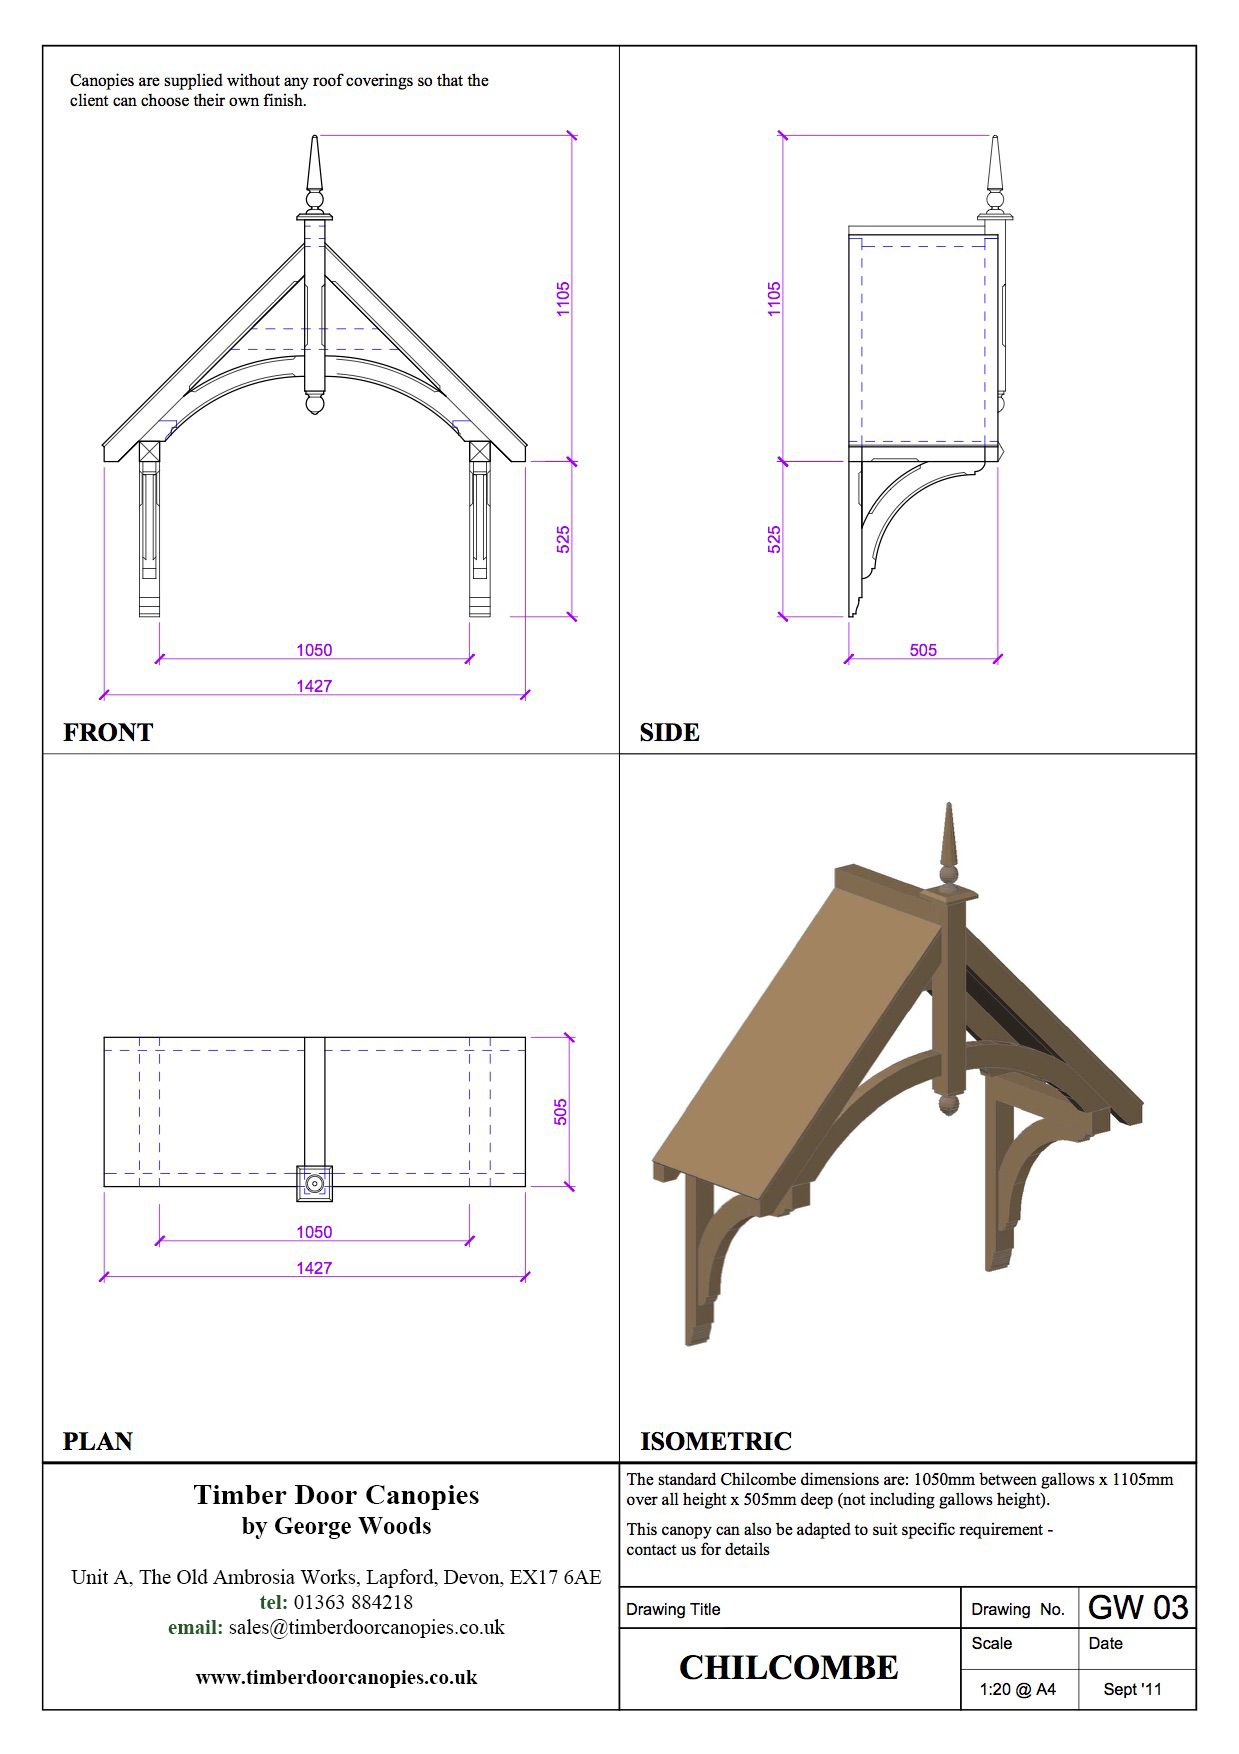 Eastacombe canopy CAD drawings